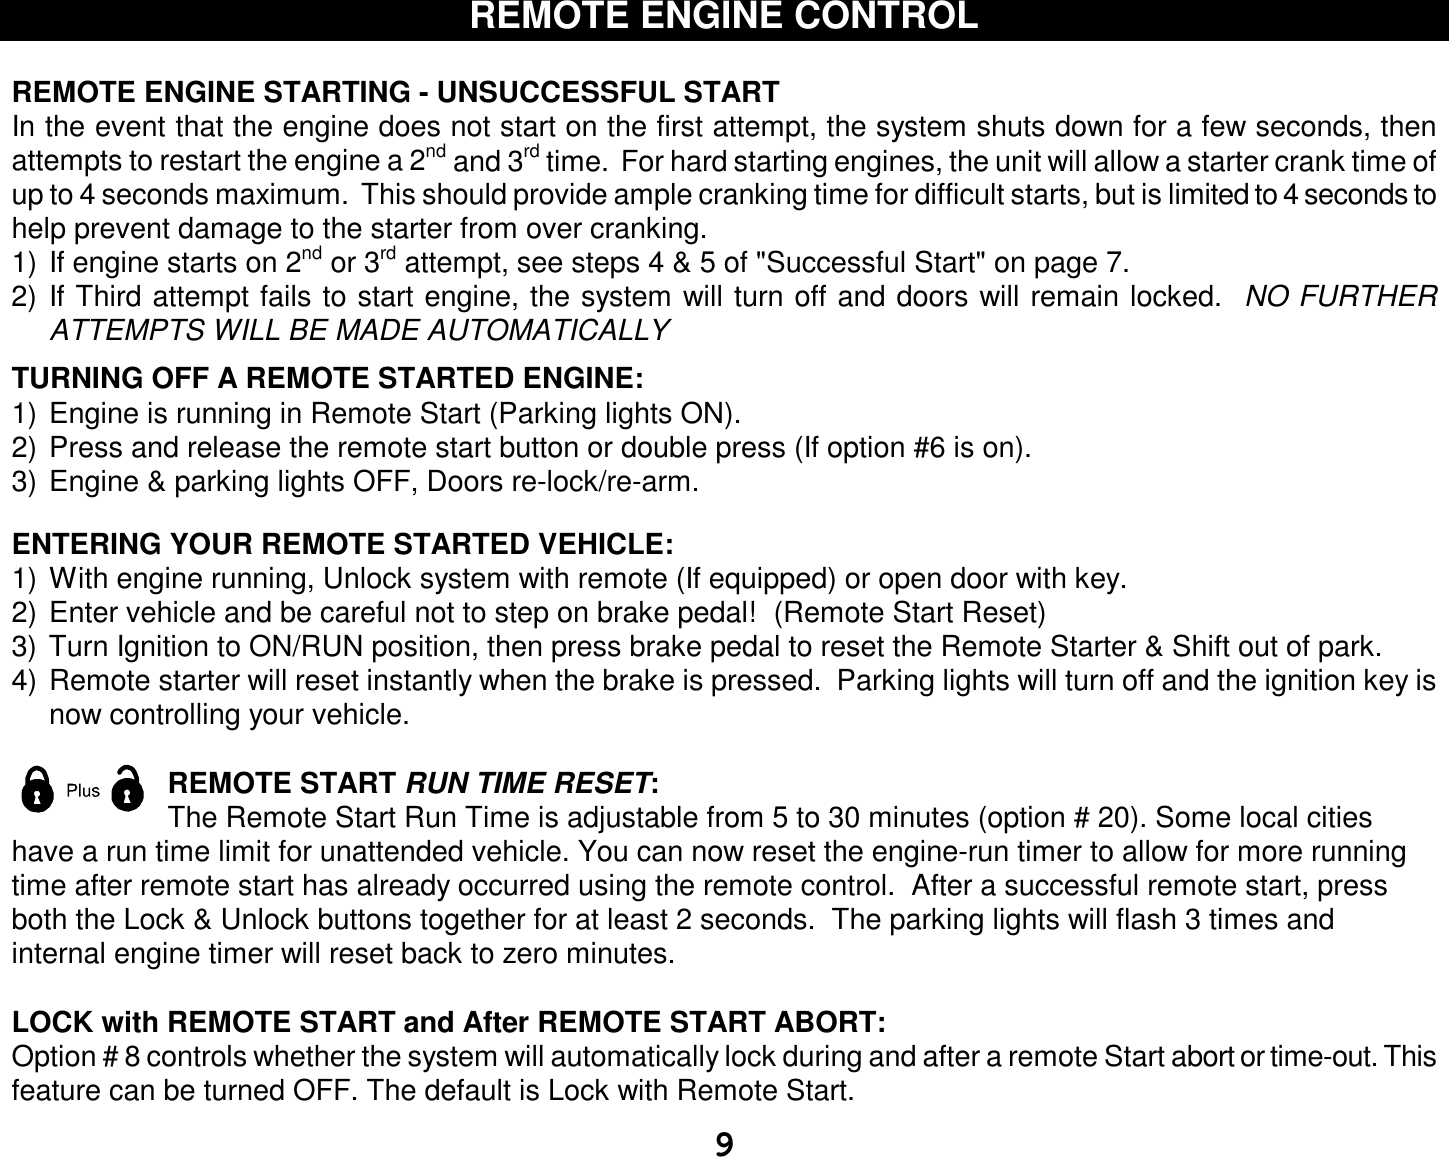  9 REMOTE ENGINE CONTROL  REMOTE ENGINE STARTING - UNSUCCESSFUL START In the event that the engine does not start on the first attempt, the system shuts down for a few seconds, then attempts to restart the engine a 2nd and 3rd time.  For hard starting engines, the unit will allow a starter crank time of up to 4 seconds maximum.  This should provide ample cranking time for difficult starts, but is limited to 4 seconds to help prevent damage to the starter from over cranking. 1) If engine starts on 2nd or 3rd attempt, see steps 4 &amp; 5 of &quot;Successful Start&quot; on page 7. 2) If Third attempt fails to start engine, the system will turn off and doors will remain locked.  NO FURTHER ATTEMPTS WILL BE MADE AUTOMATICALLY  TURNING OFF A REMOTE STARTED ENGINE: 1) Engine is running in Remote Start (Parking lights ON). 2) Press and release the remote start button or double press (If option #6 is on).  3) Engine &amp; parking lights OFF, Doors re-lock/re-arm.   ENTERING YOUR REMOTE STARTED VEHICLE: 1) With engine running, Unlock system with remote (If equipped) or open door with key. 2) Enter vehicle and be careful not to step on brake pedal!  (Remote Start Reset) 3) Turn Ignition to ON/RUN position, then press brake pedal to reset the Remote Starter &amp; Shift out of park. 4) Remote starter will reset instantly when the brake is pressed.  Parking lights will turn off and the ignition key is now controlling your vehicle.  REMOTE START RUN TIME RESET: The Remote Start Run Time is adjustable from 5 to 30 minutes (option # 20). Some local cities have a run time limit for unattended vehicle. You can now reset the engine-run timer to allow for more running time after remote start has already occurred using the remote control.  After a successful remote start, press both the Lock &amp; Unlock buttons together for at least 2 seconds.  The parking lights will flash 3 times and internal engine timer will reset back to zero minutes.  LOCK with REMOTE START and After REMOTE START ABORT: Option # 8 controls whether the system will automatically lock during and after a remote Start abort or time-out. This feature can be turned OFF. The default is Lock with Remote Start. 